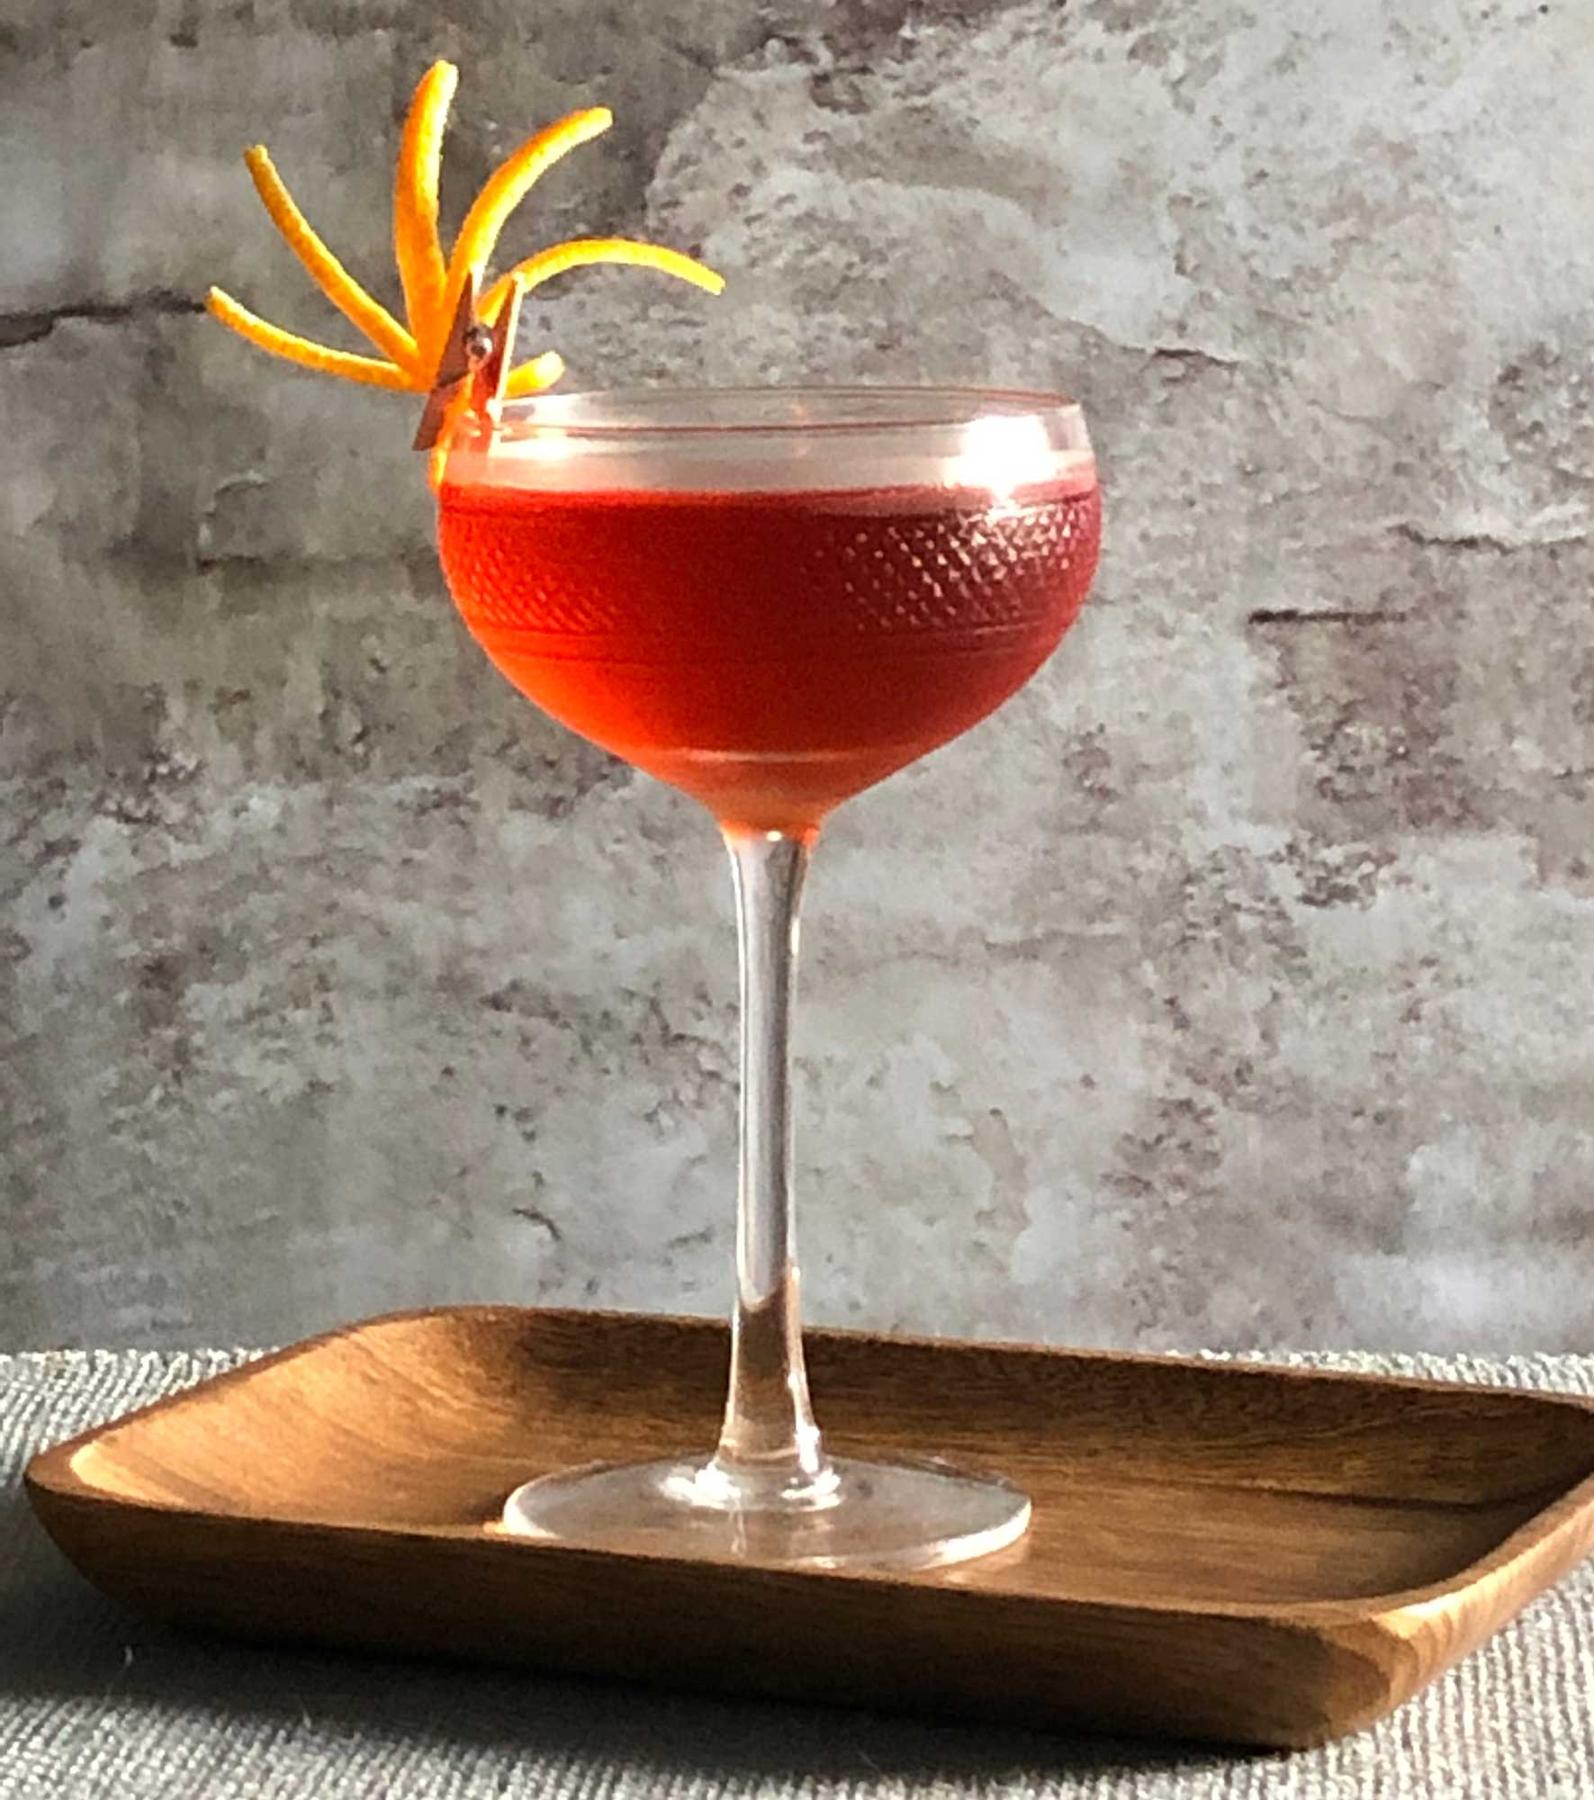 An example of the Negroni Rosa, the mixed drink (drink) featuring Hayman’s London Dry Gin, Cocchi Americano Rosa, Aperitivo Cappelletti, and orange twist; photo by Lee Edwards